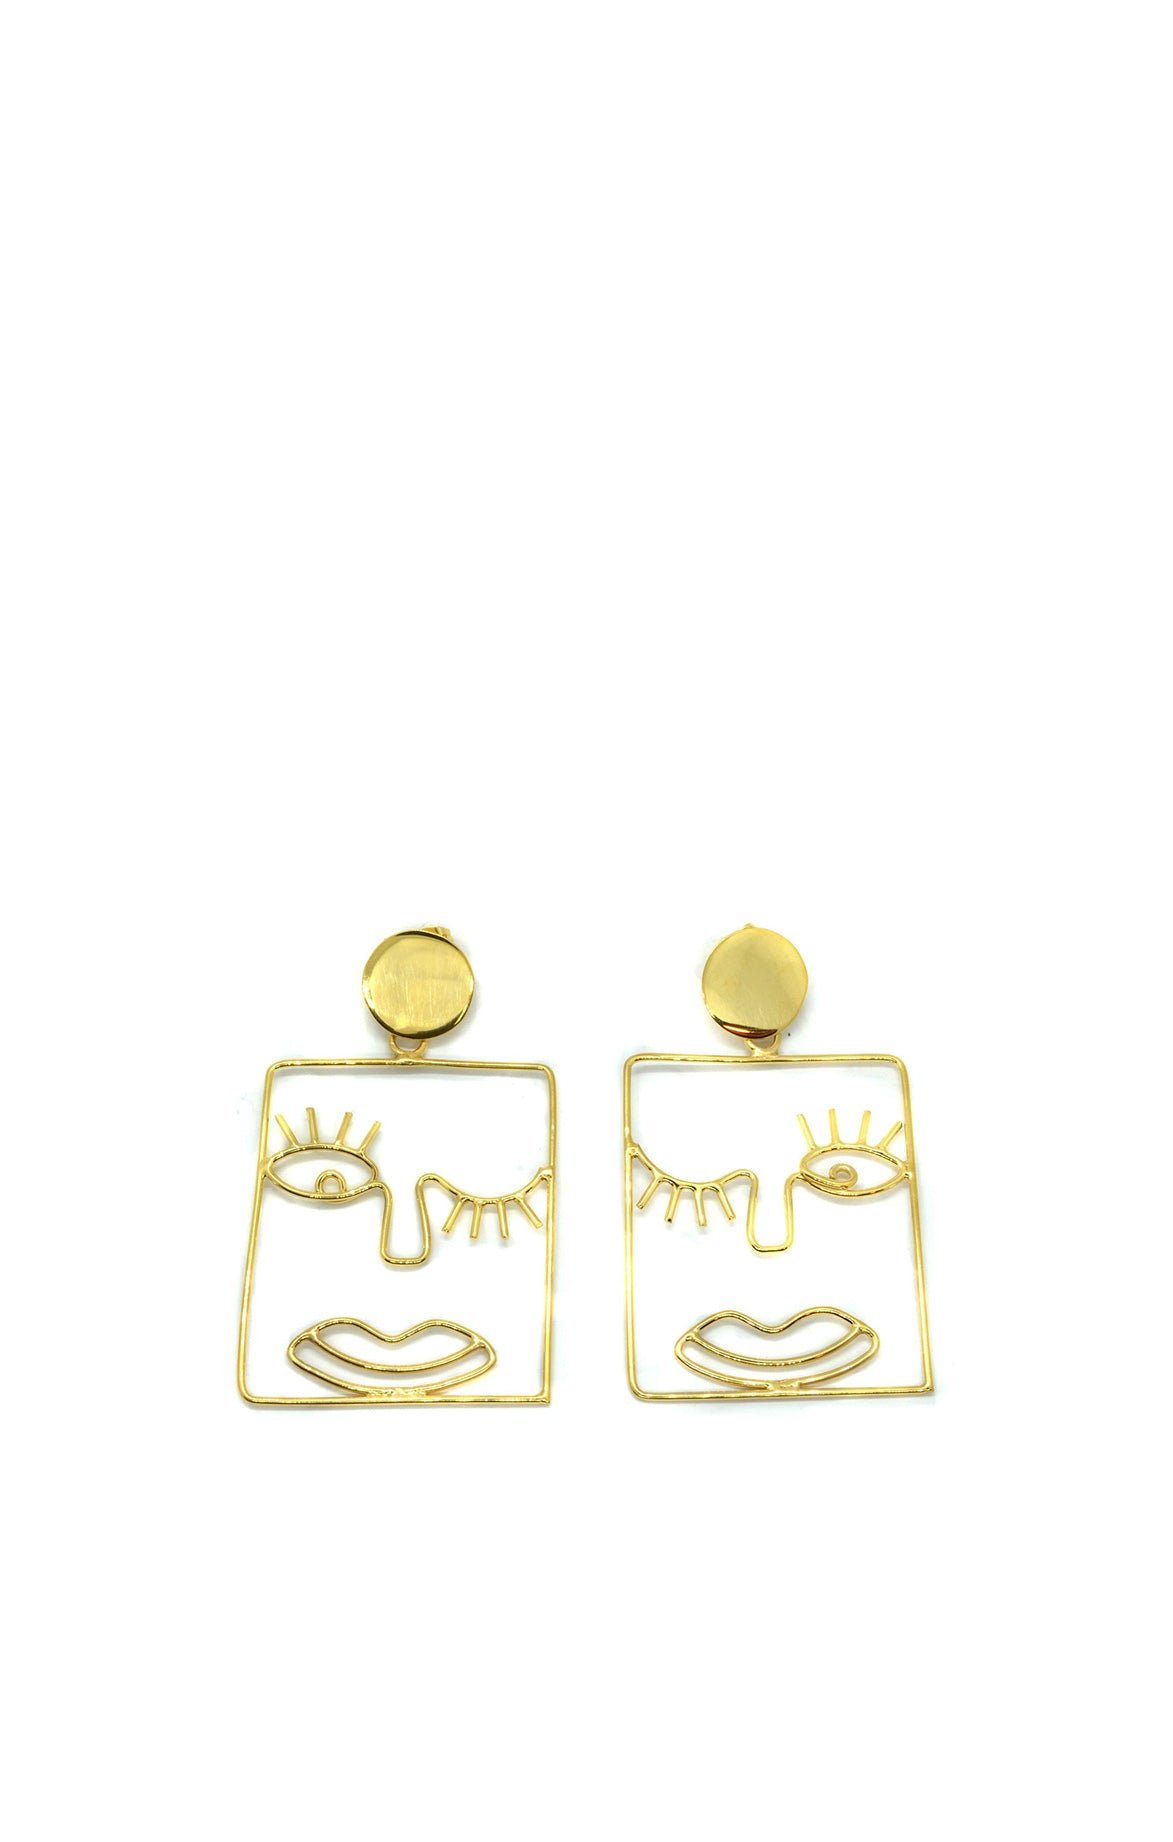 Details on Gold Face Figure Square Earrings